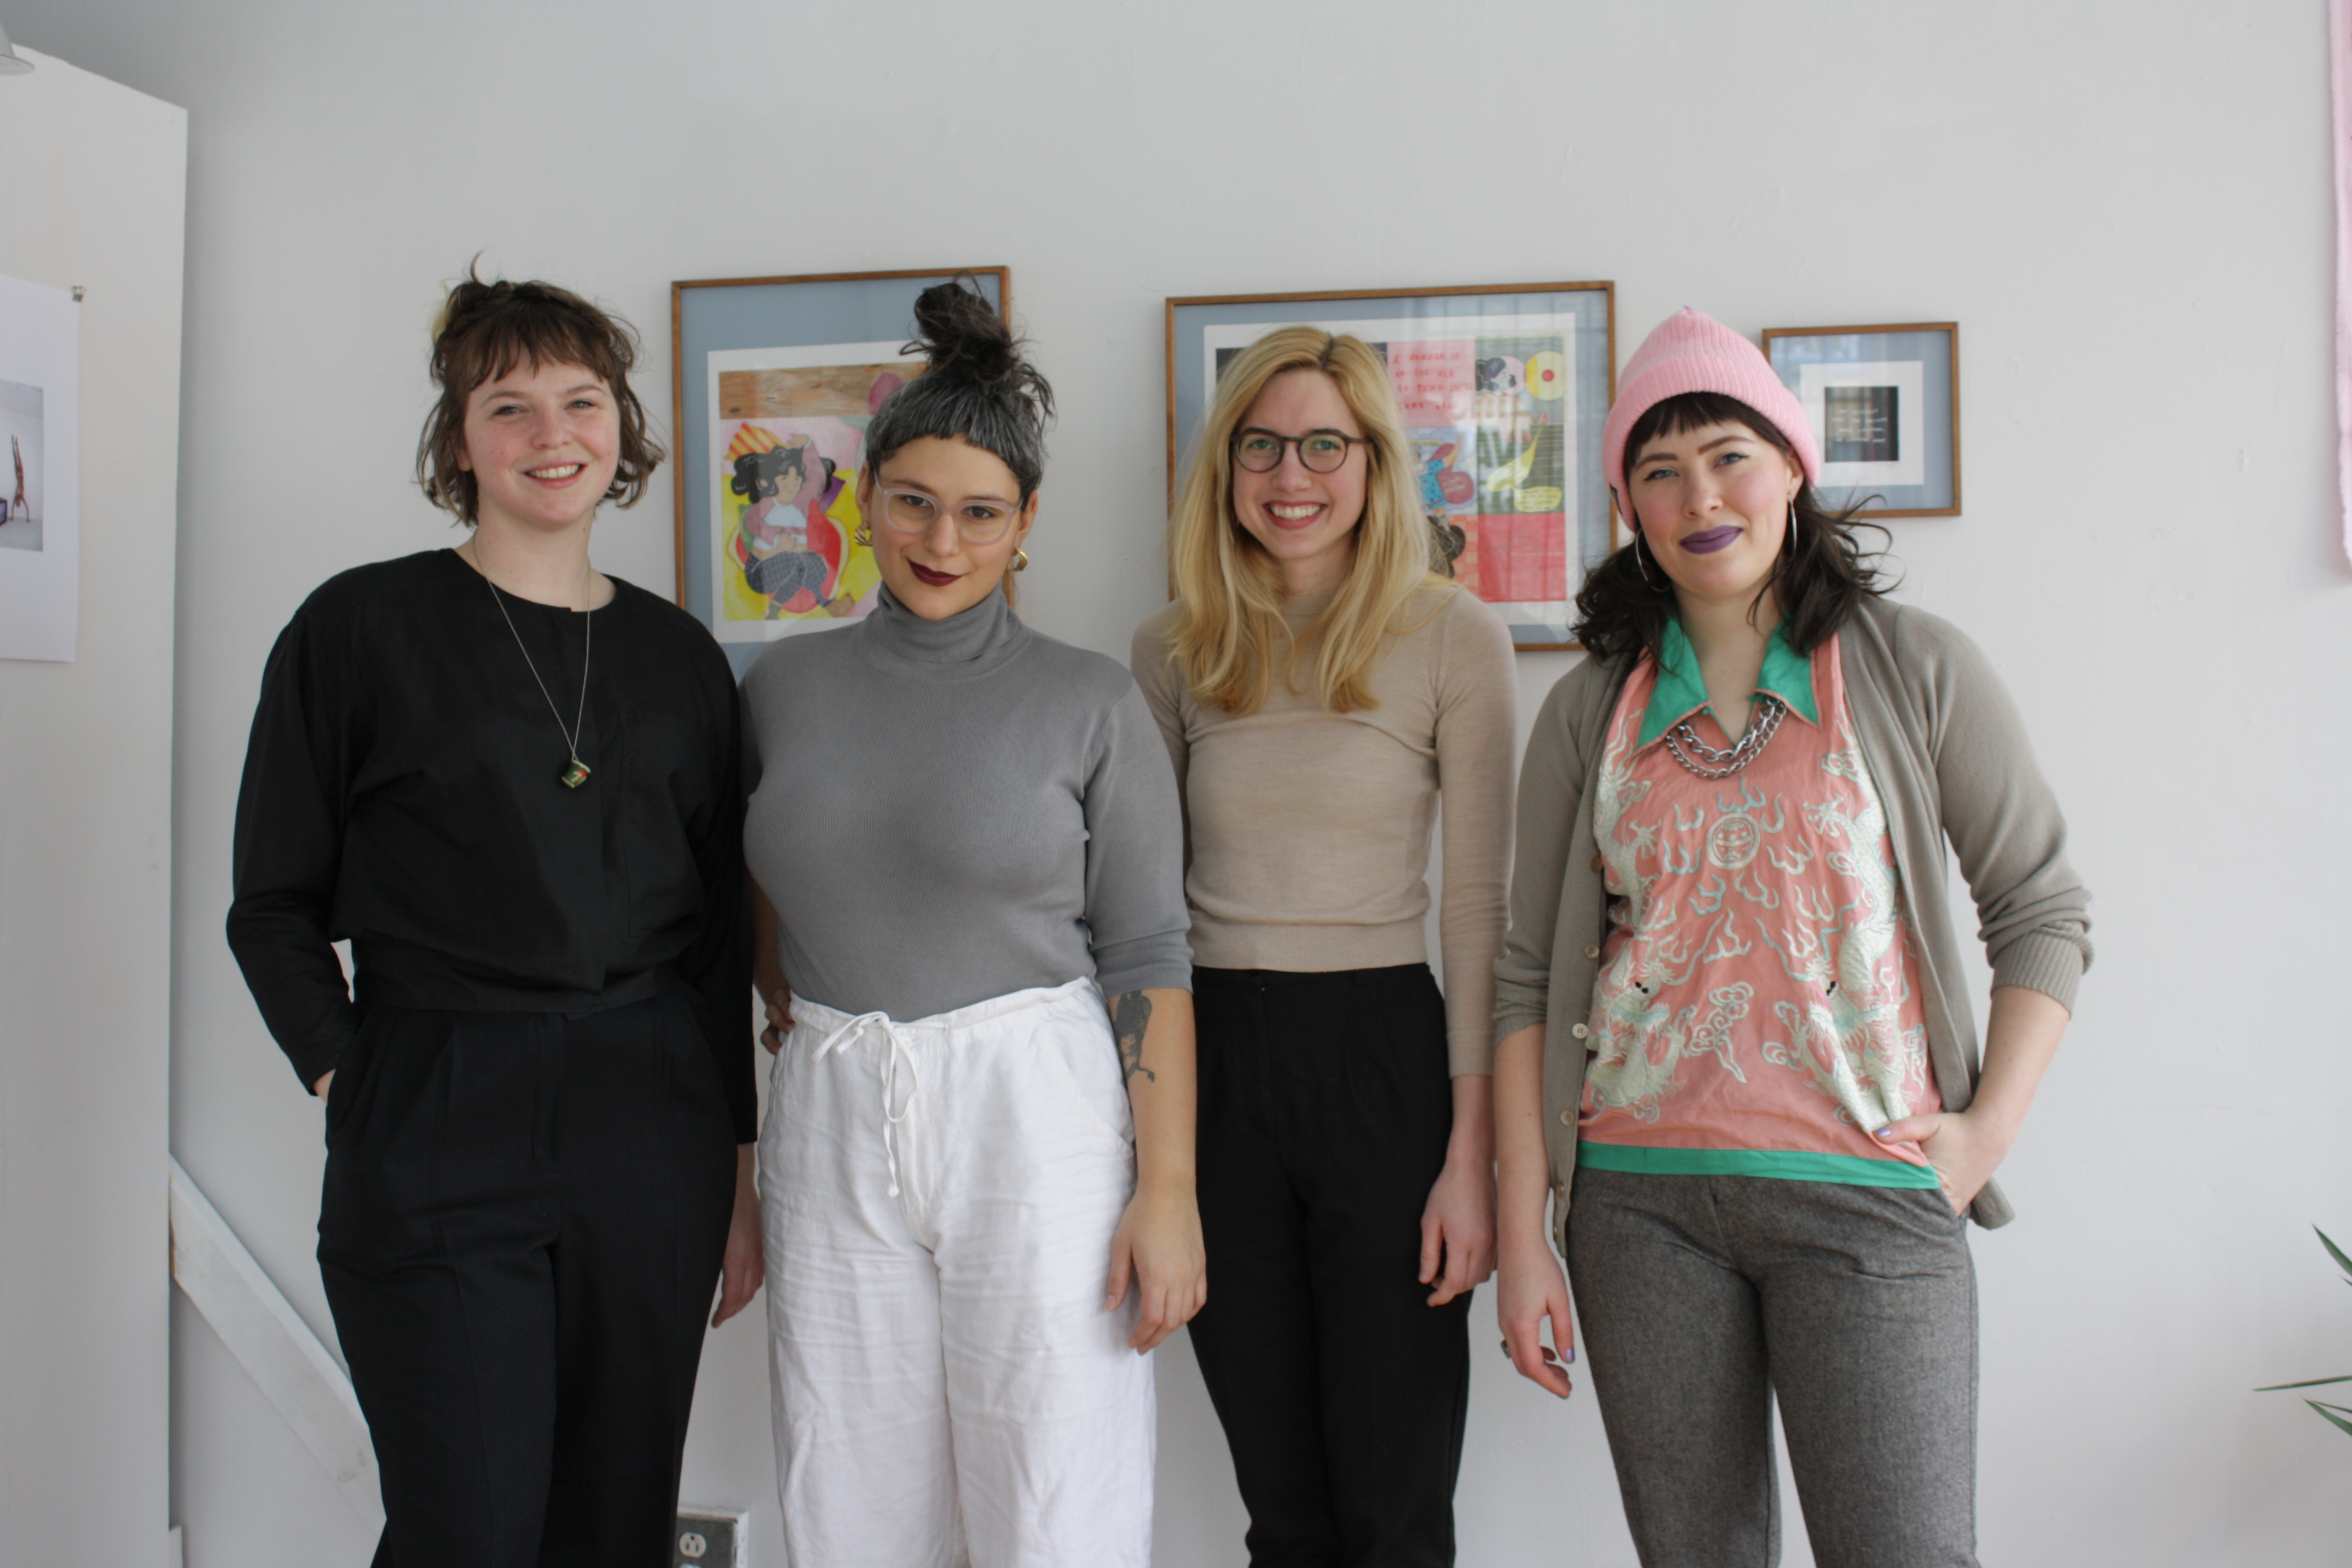 Hume Chicago is a storefront gallery space run by women and queer artists. Here, Katy Albert, Fontaine Capel, Caroline Walp, and Krystal DiFronzo stand together in the gallery space. Photo by Hannah Siegfried